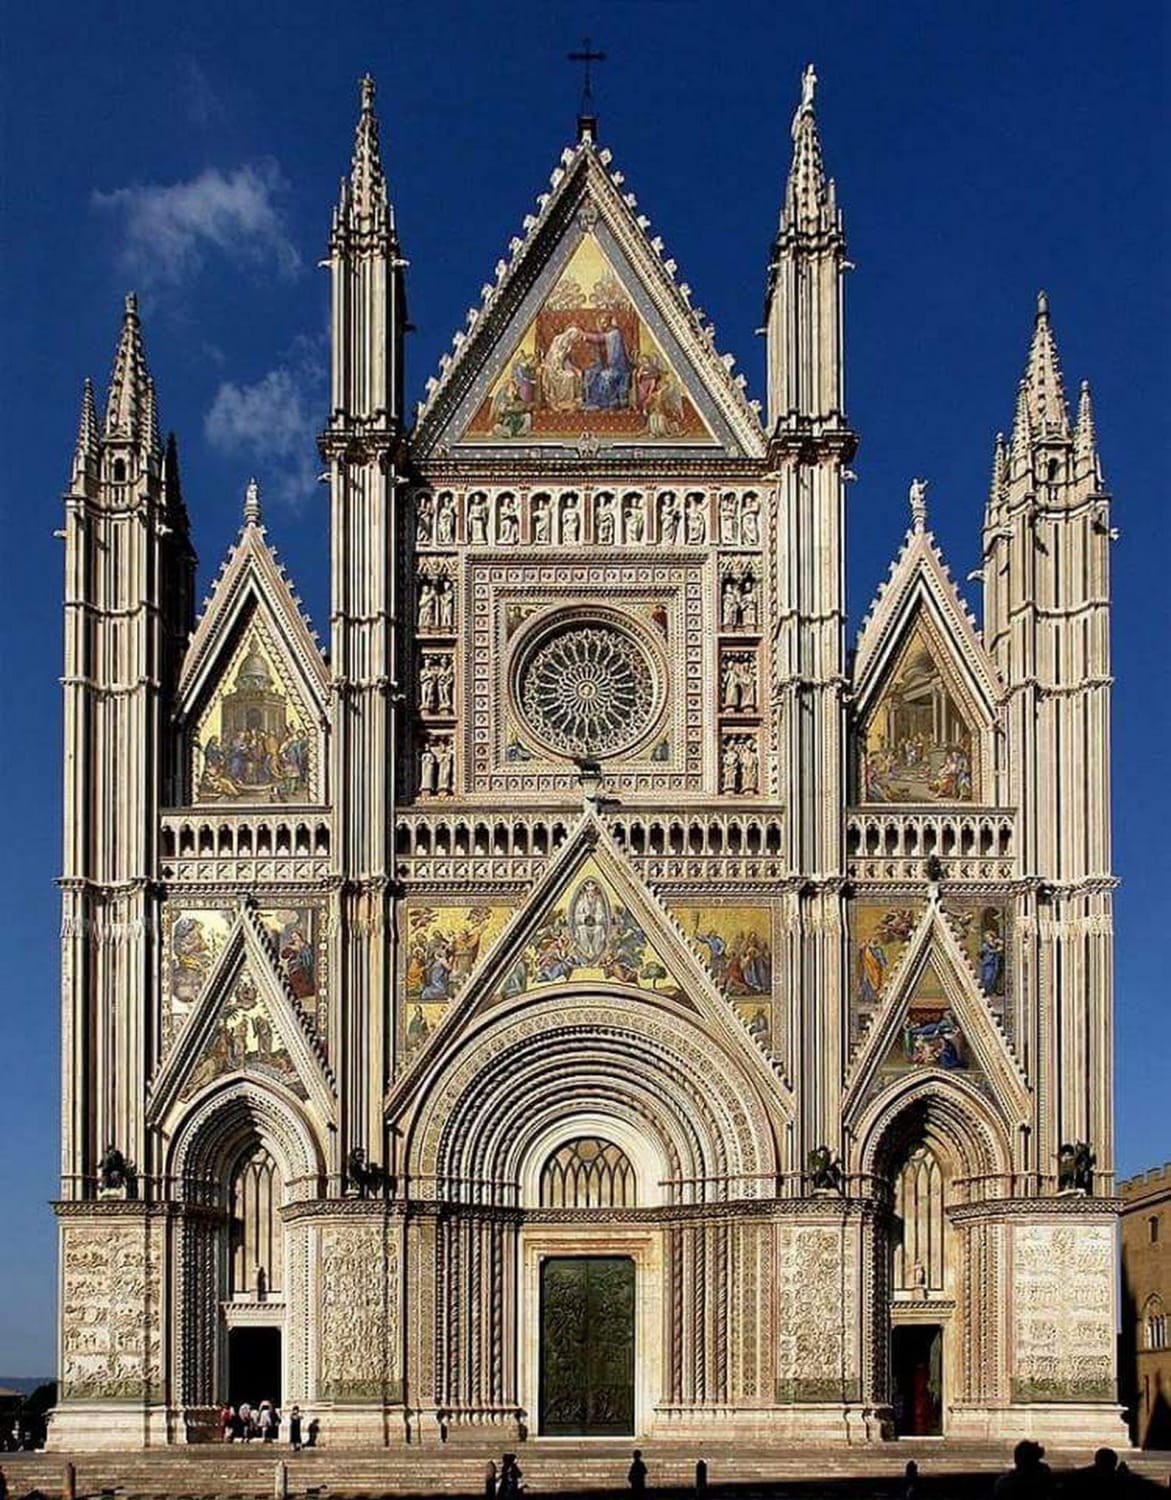 The Duomo of Orvieto - Orvieto, Italy - Construction begun 1270 by architects Arnolfo di Cambio and Lorenzo Maitani in Italian Gothic and Romanesque architecture with Lorenzo Maitani being credited for the magnificent facade - Completed 1591